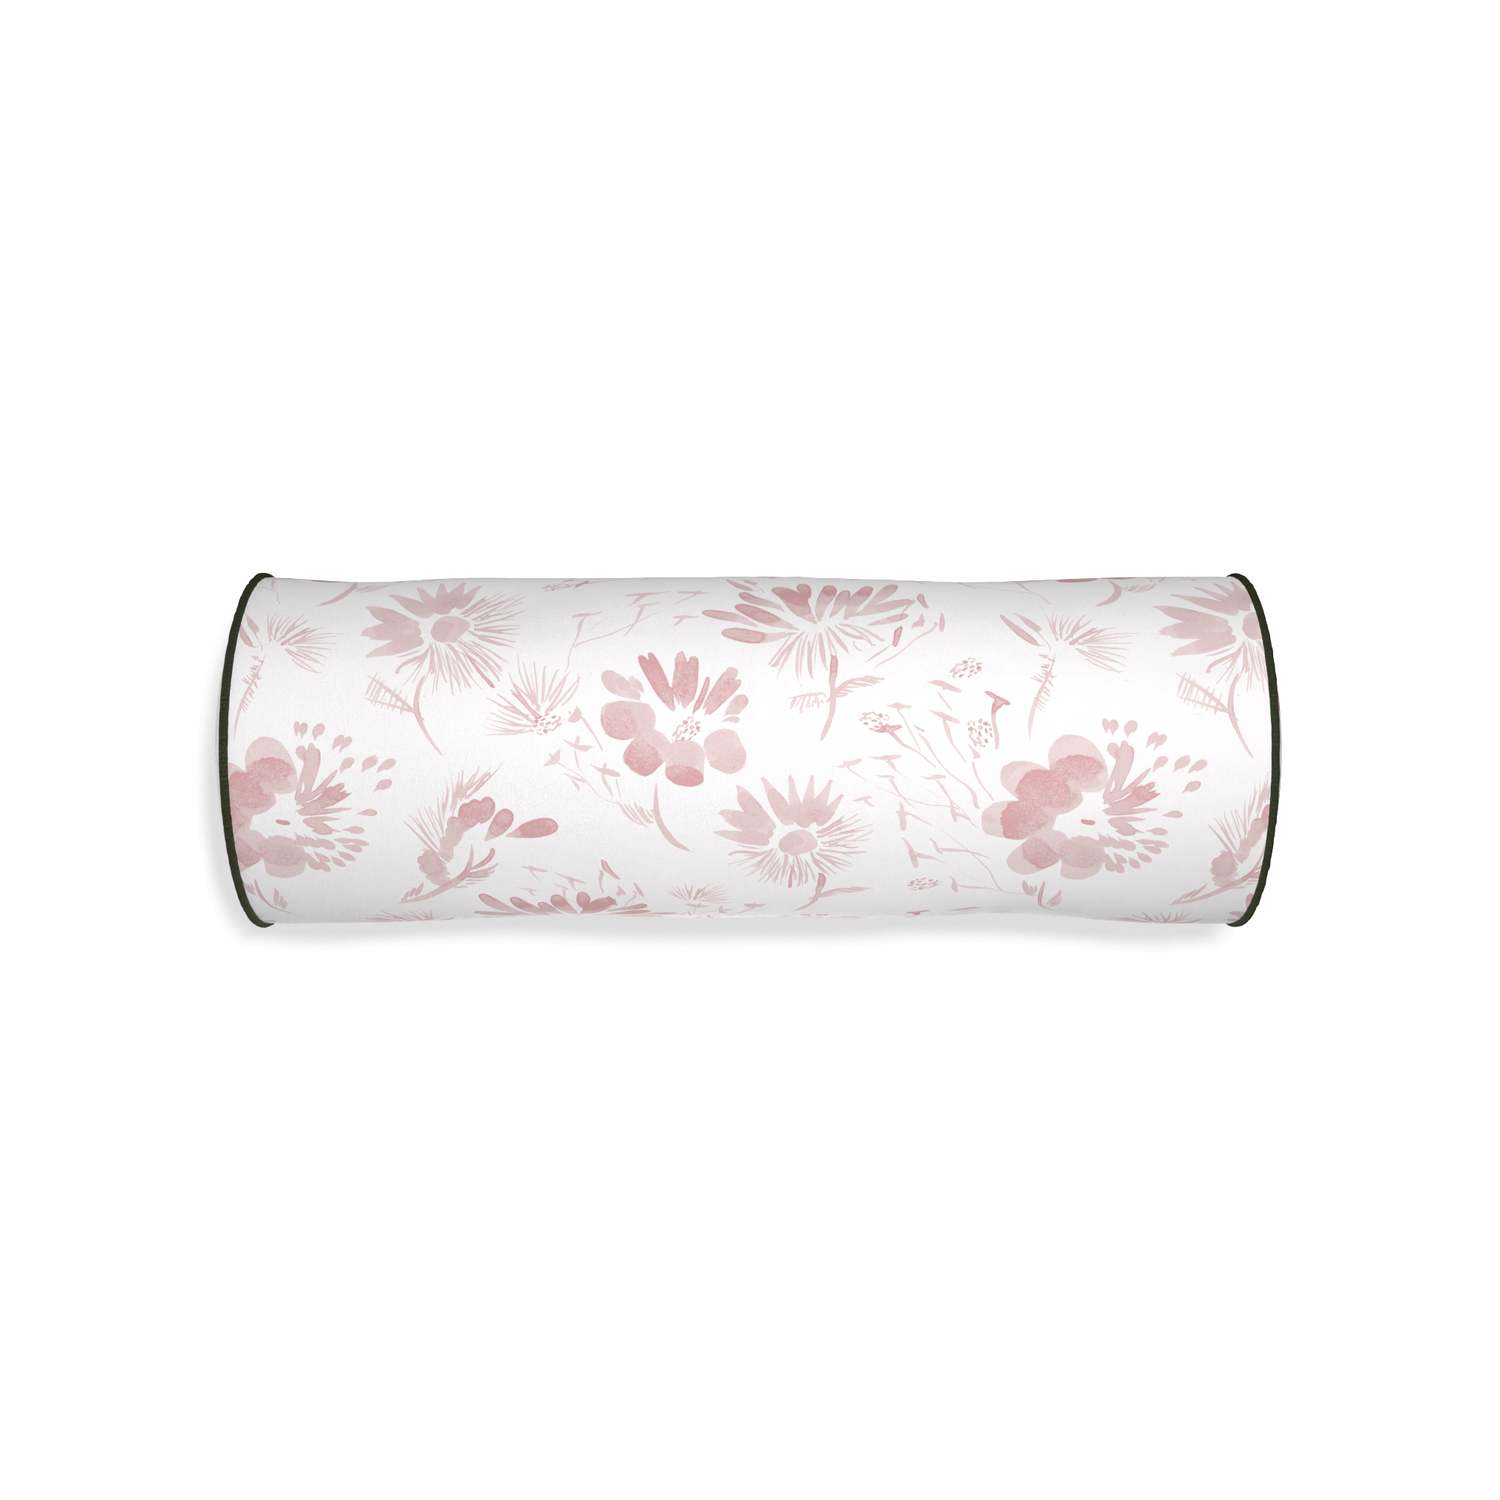 Bolster blake custom pink floralpillow with f piping on white background